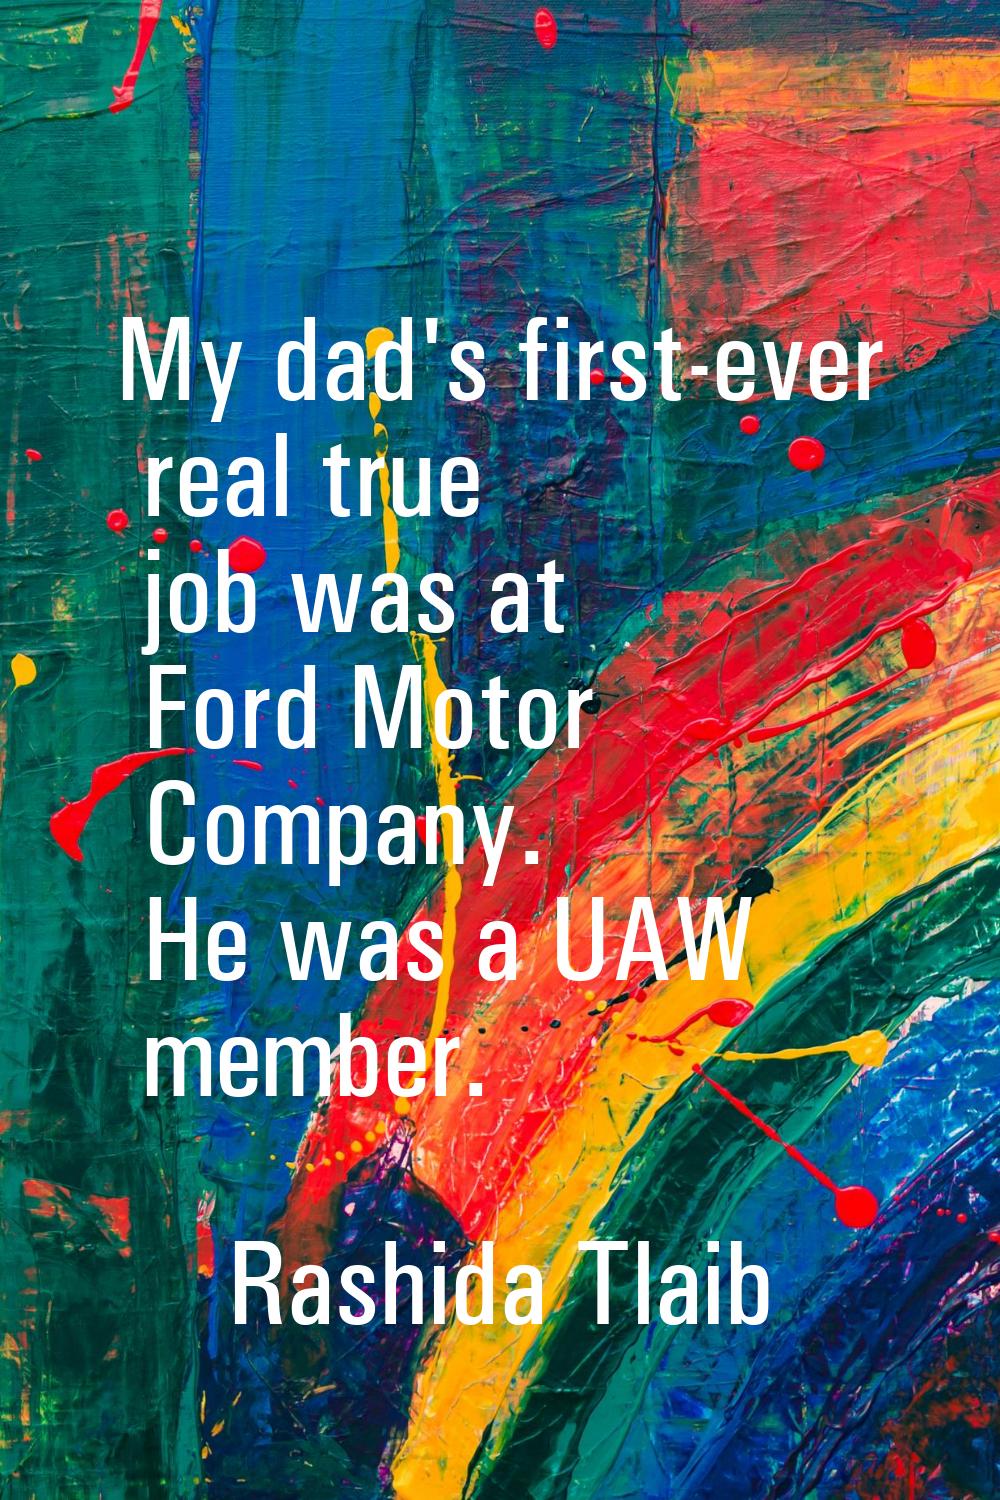 My dad's first-ever real true job was at Ford Motor Company. He was a UAW member.